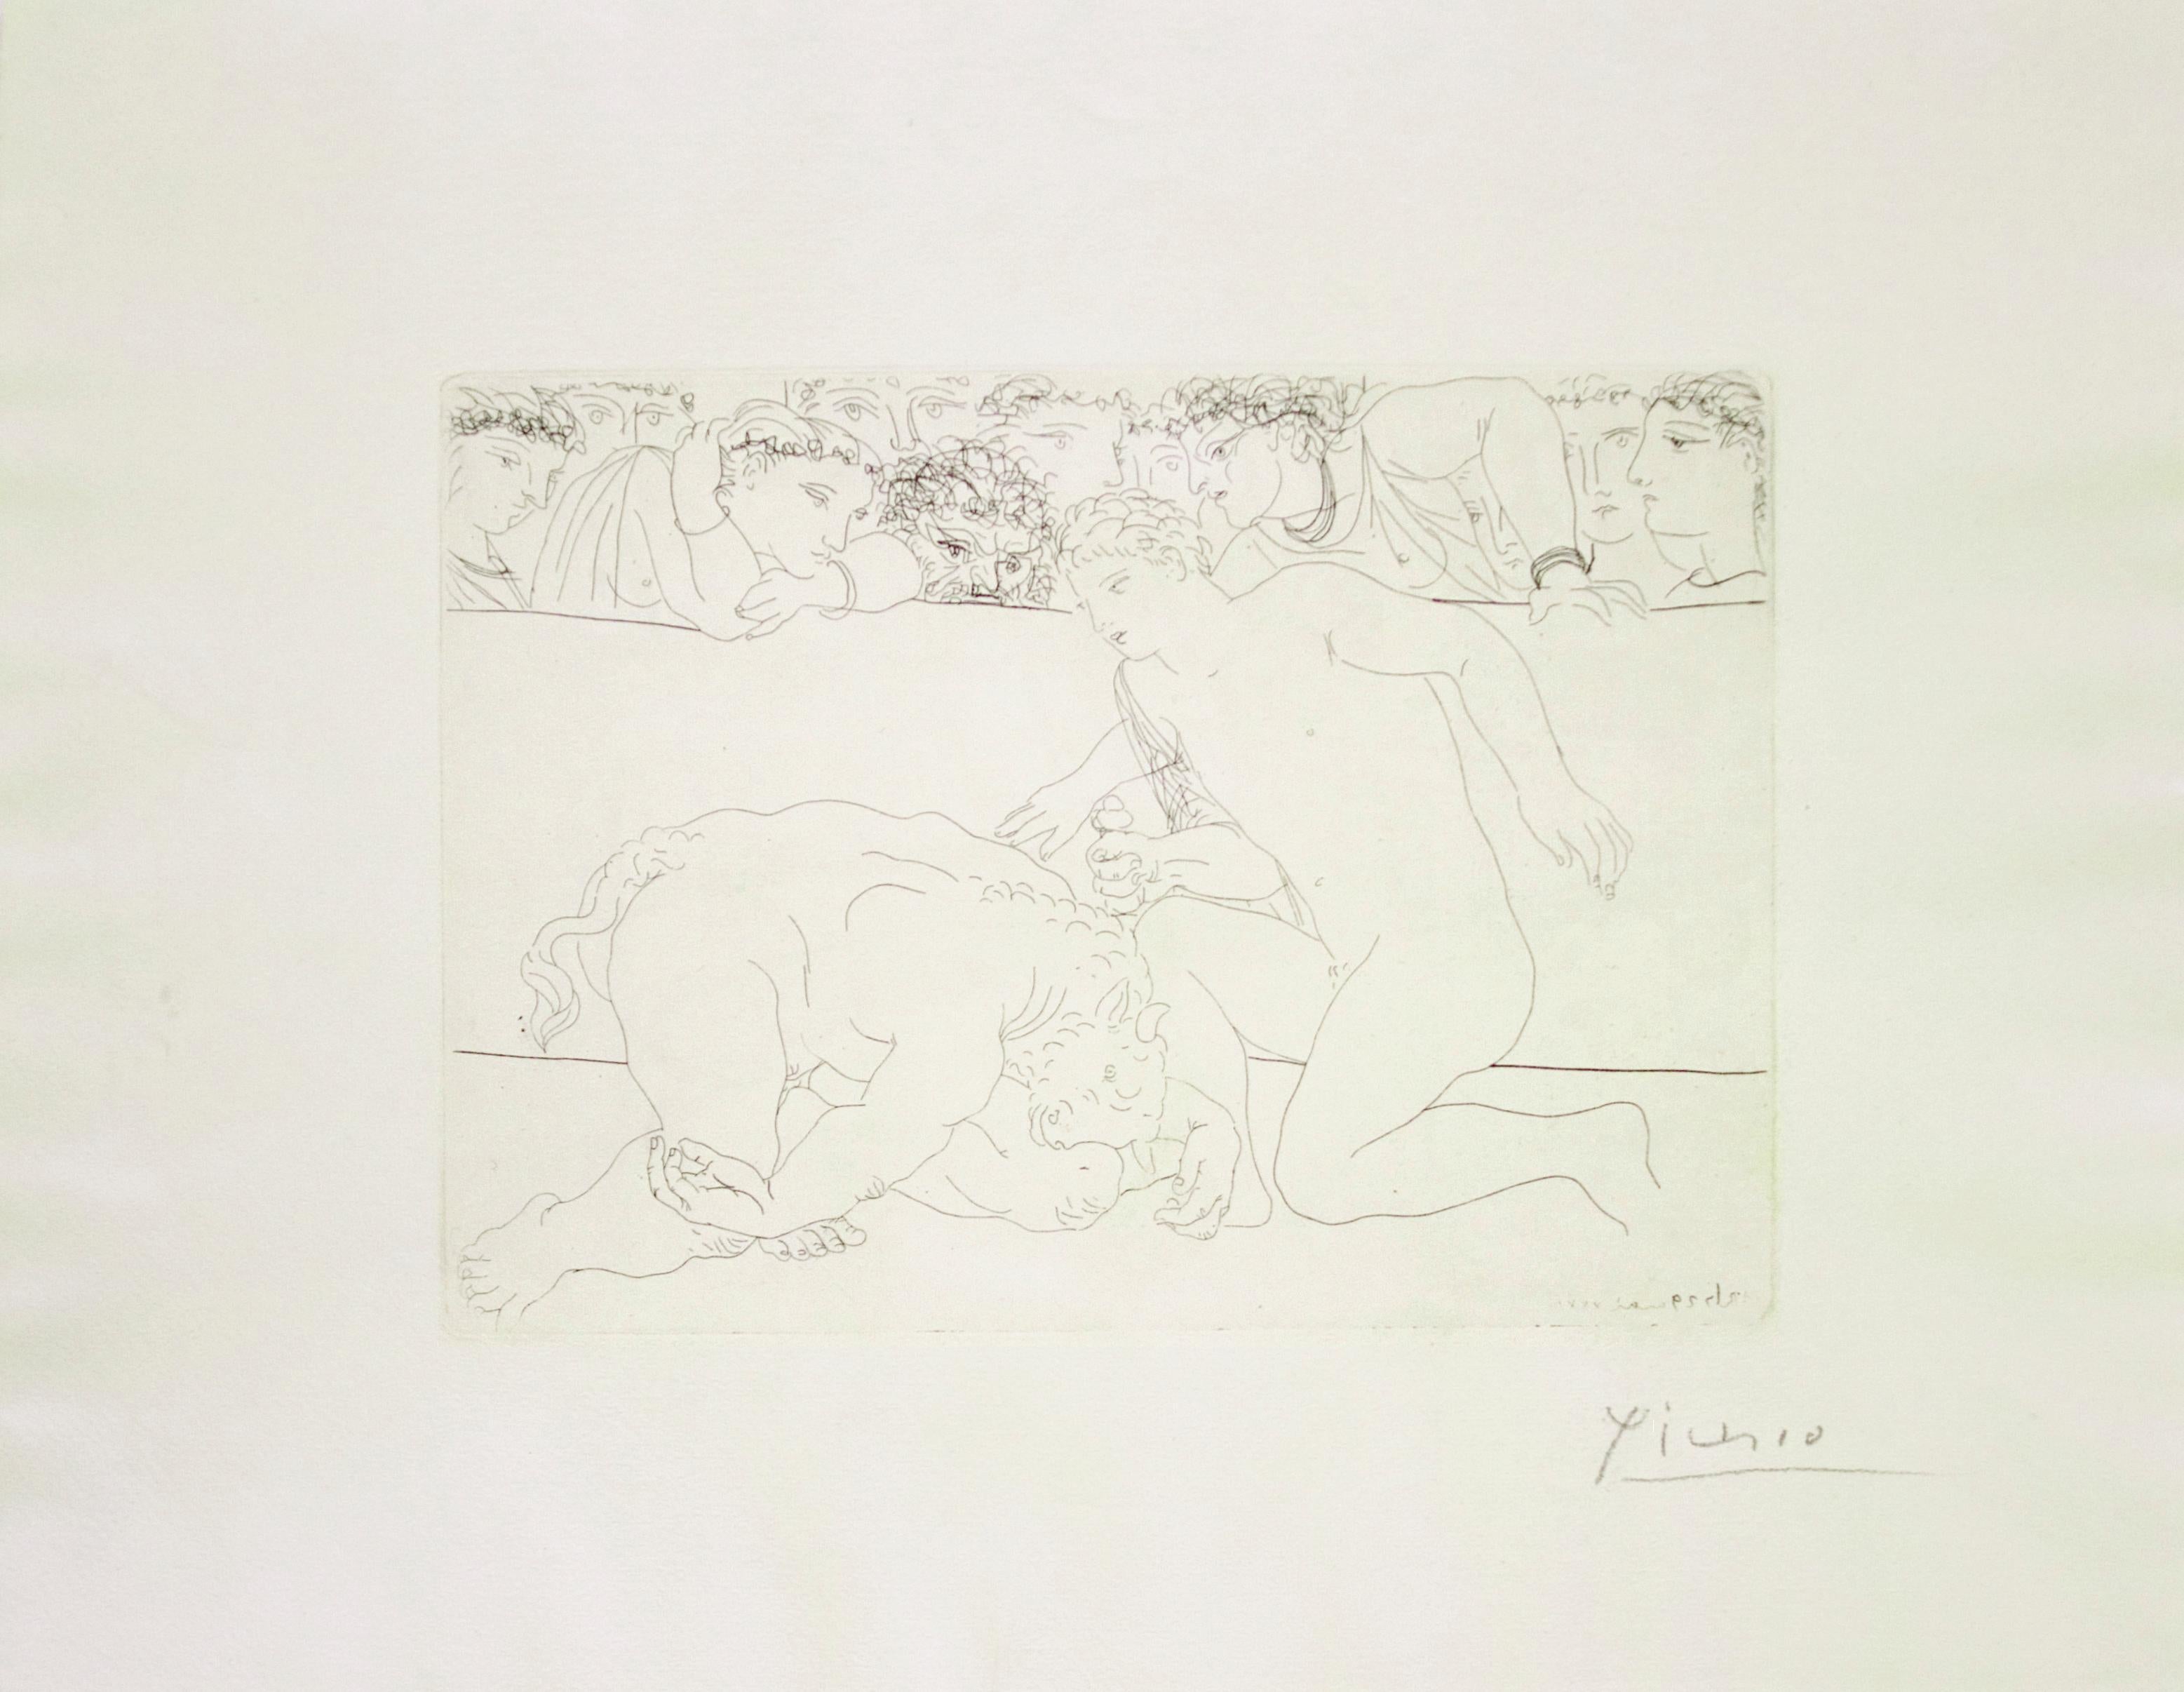 Defeated Minotaur - Etching, Signed, Figurative, Mid 20th Century - Print by Pablo Picasso